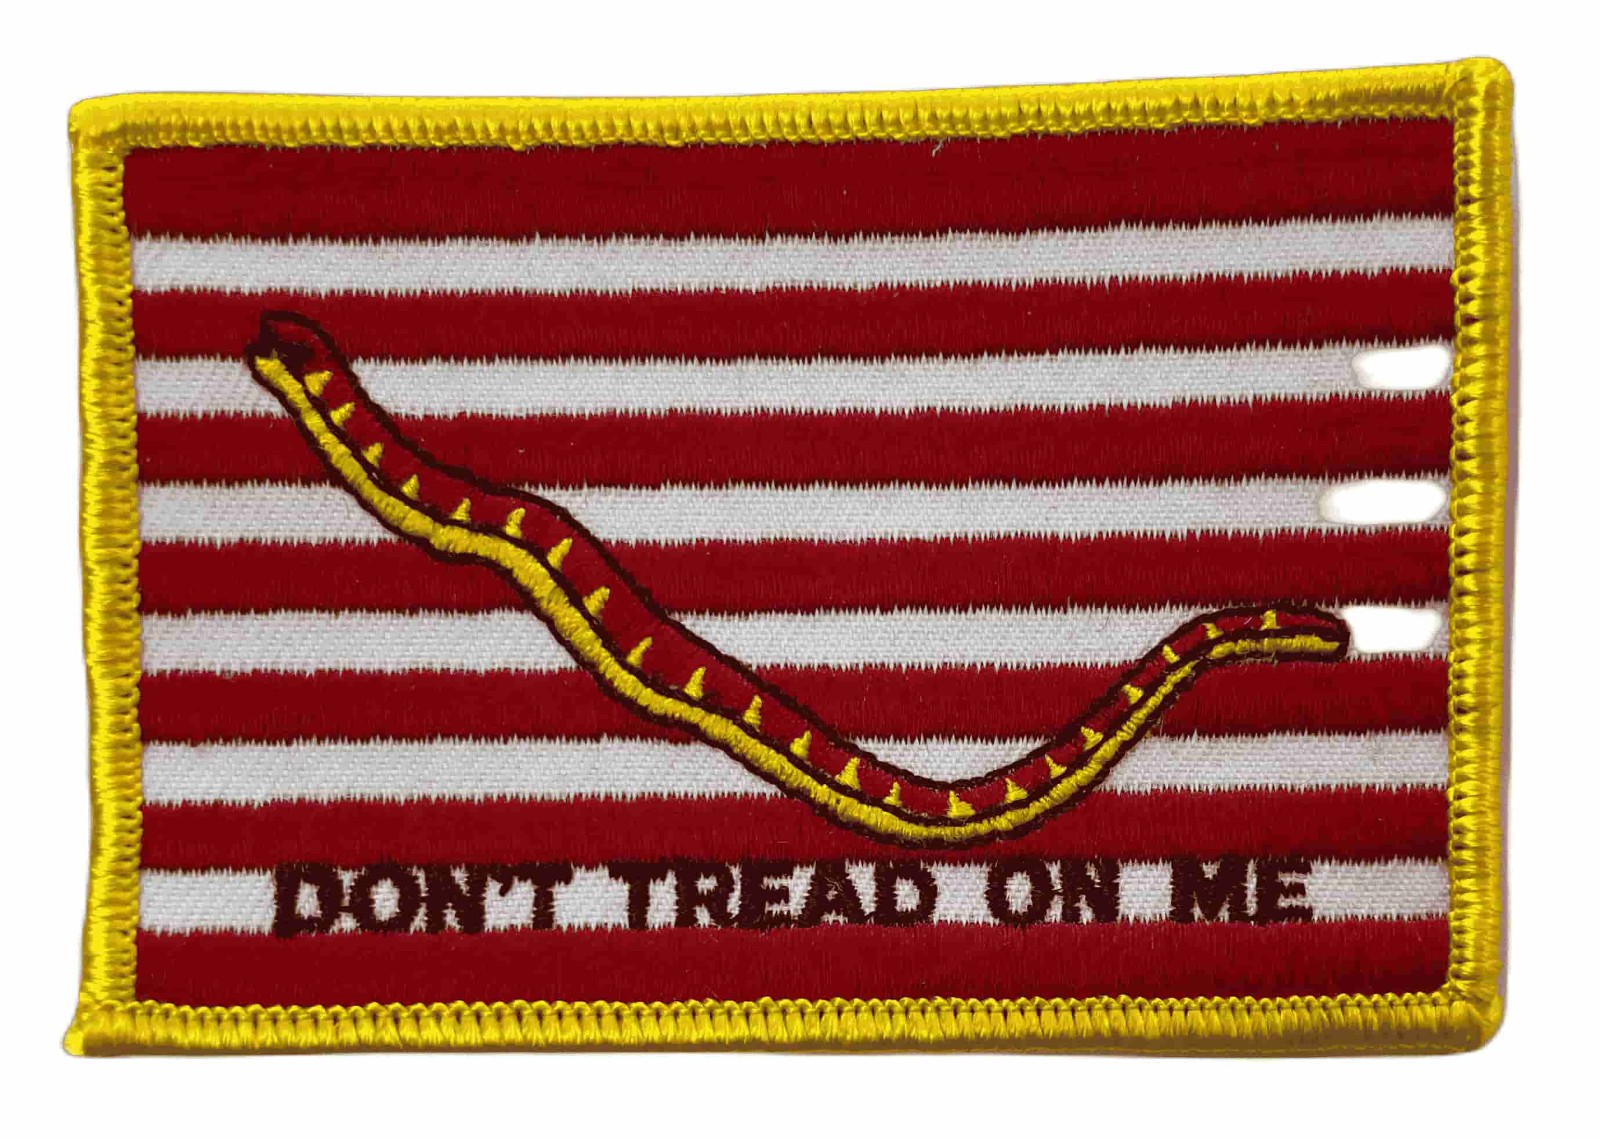 embroidered patches with Gadsden flag design